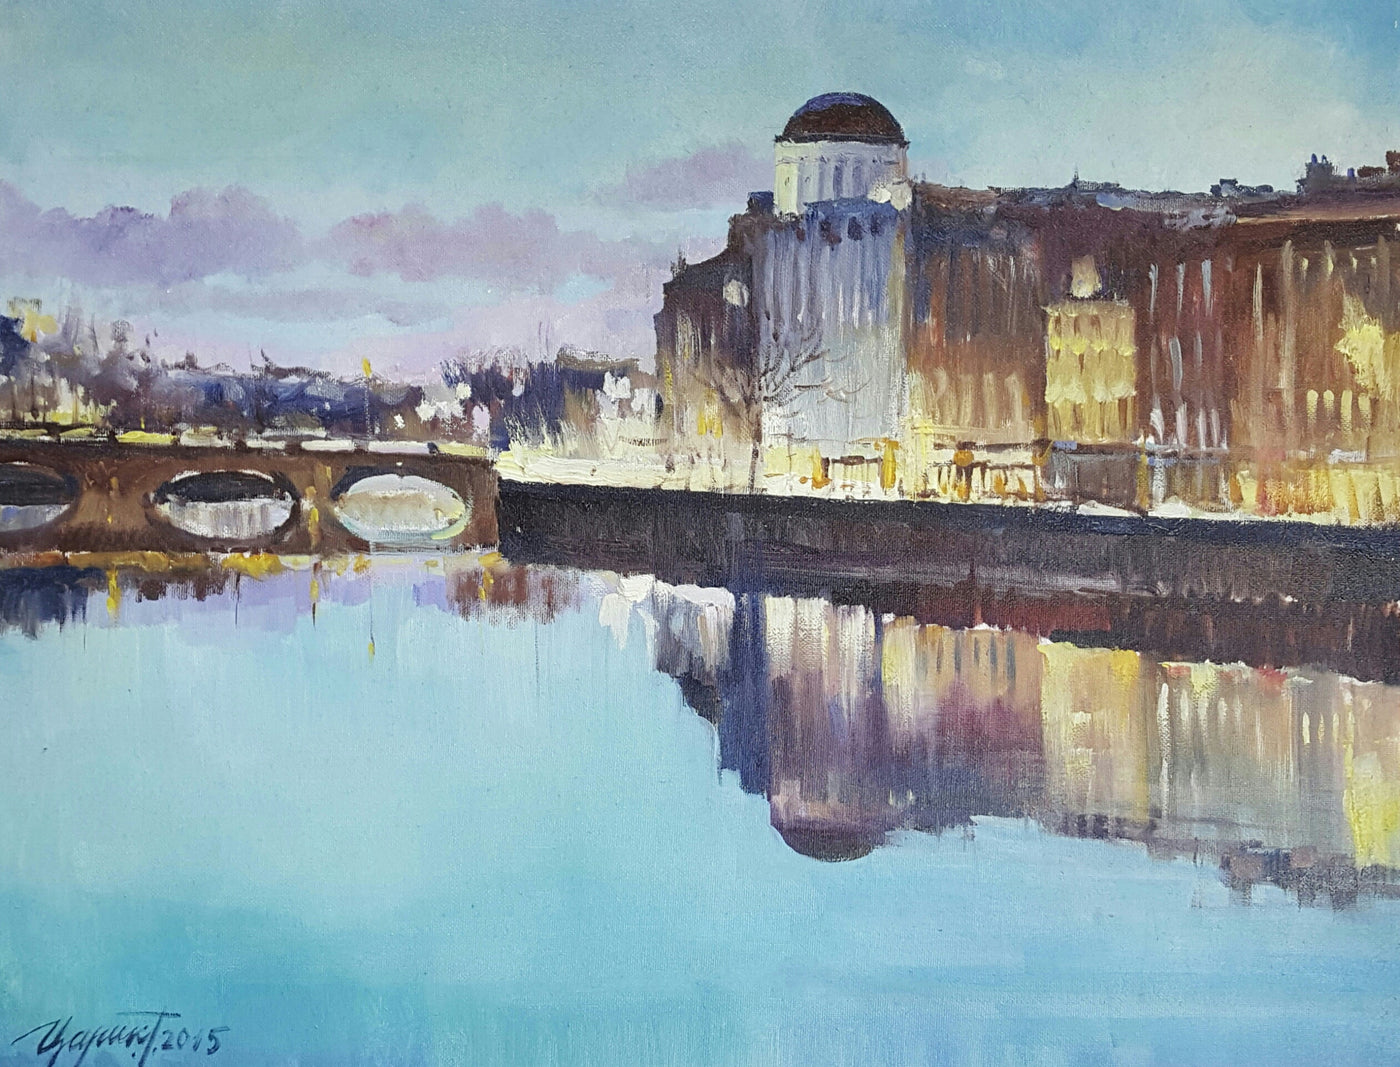 The Liffey With Four Courts - Green Gallery